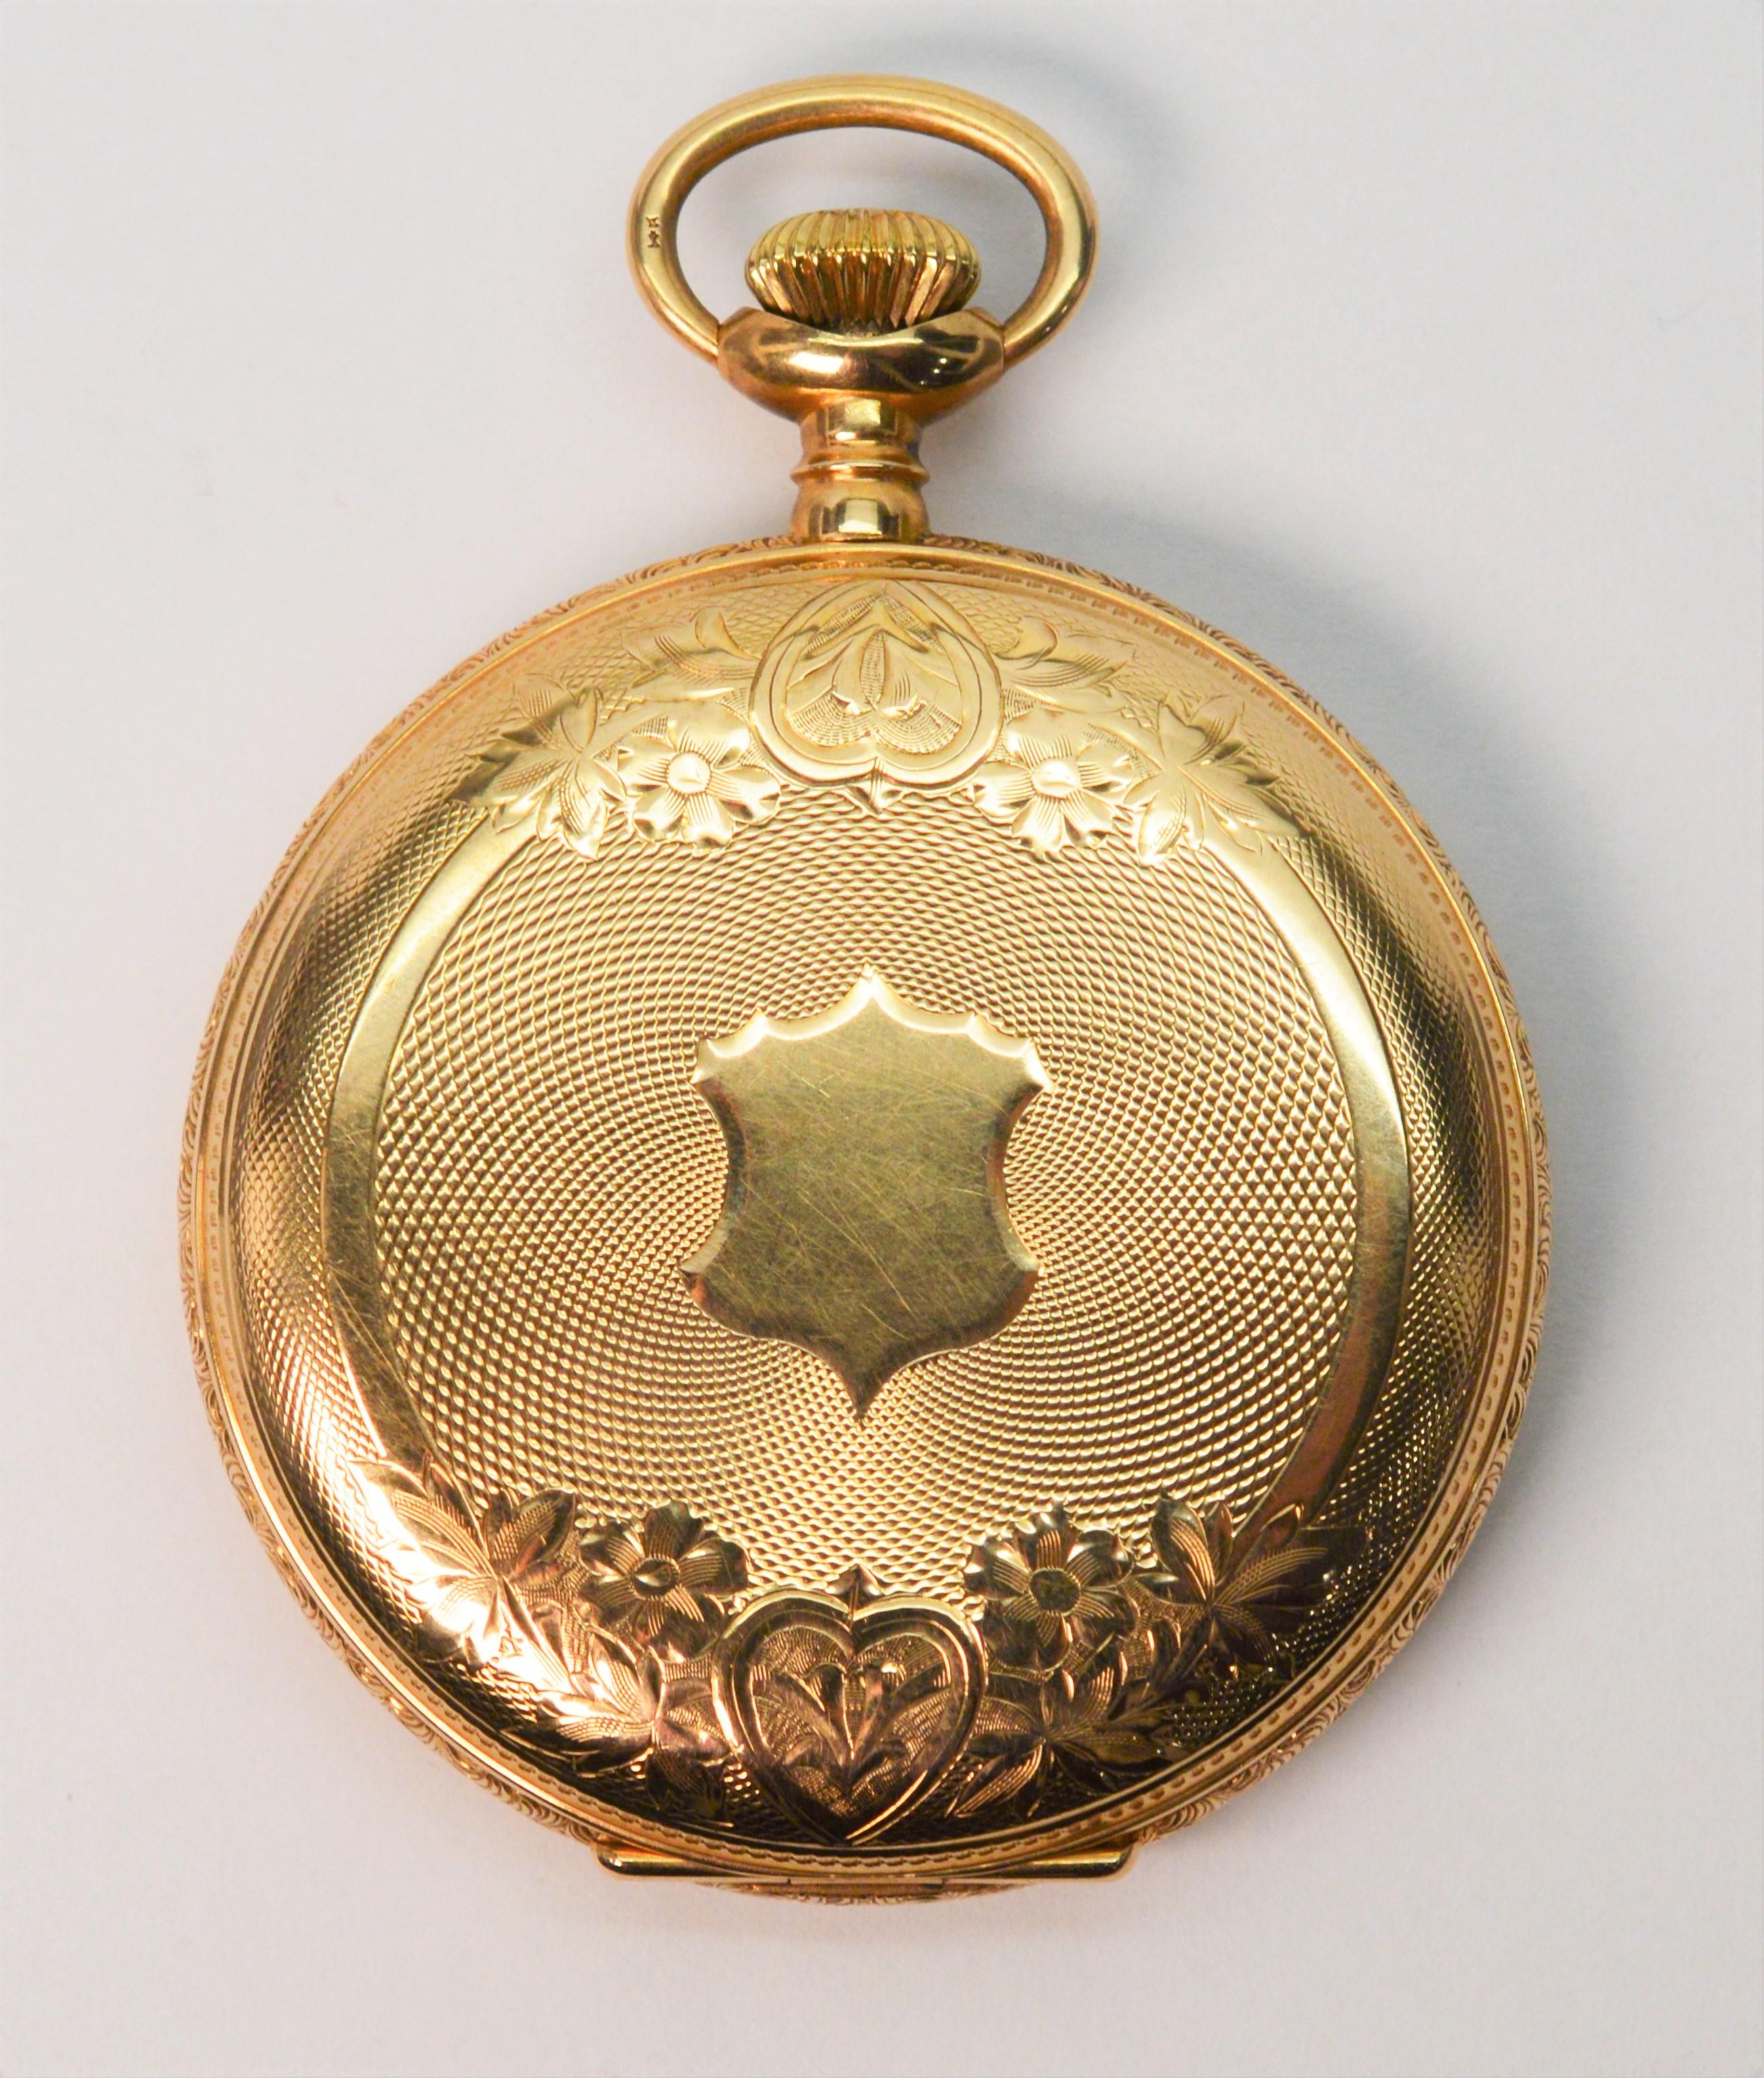 American made by Waltham Watch Co., circa 1908, this handsome pocket watch is a genuine representation of timepieces of it's period. In a fourteen karat 14k yellow gold, this Waltham 47mm pocket watch has a minty 3/4 plate acid etched seven jeweled